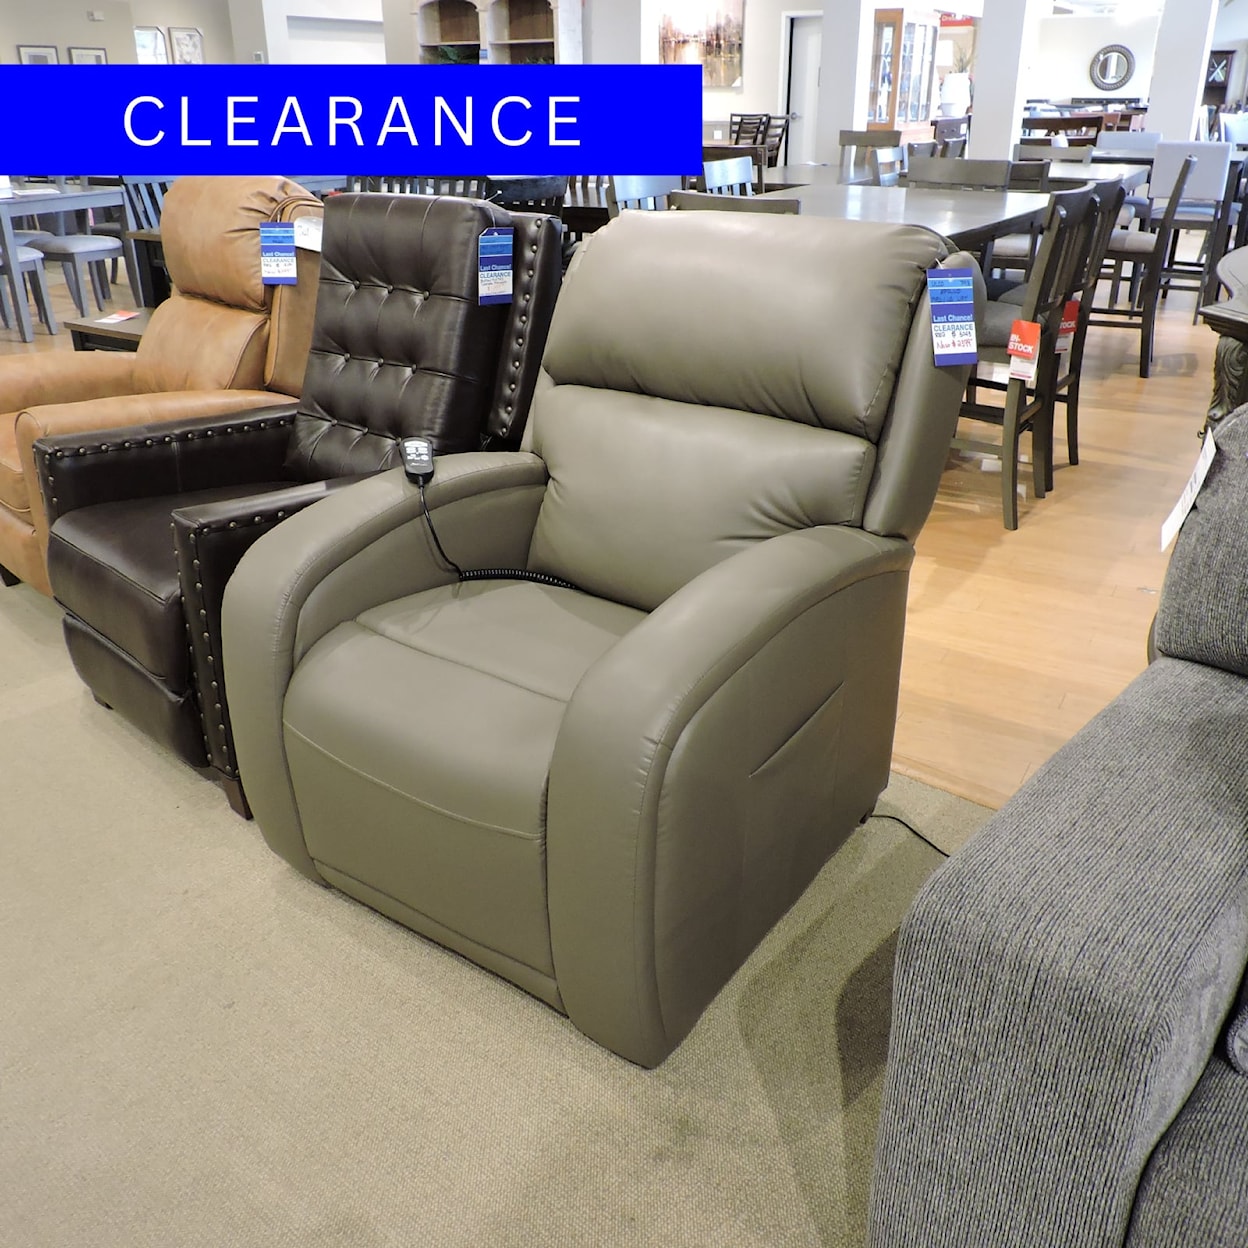 UltraComfort Clearance Recliner